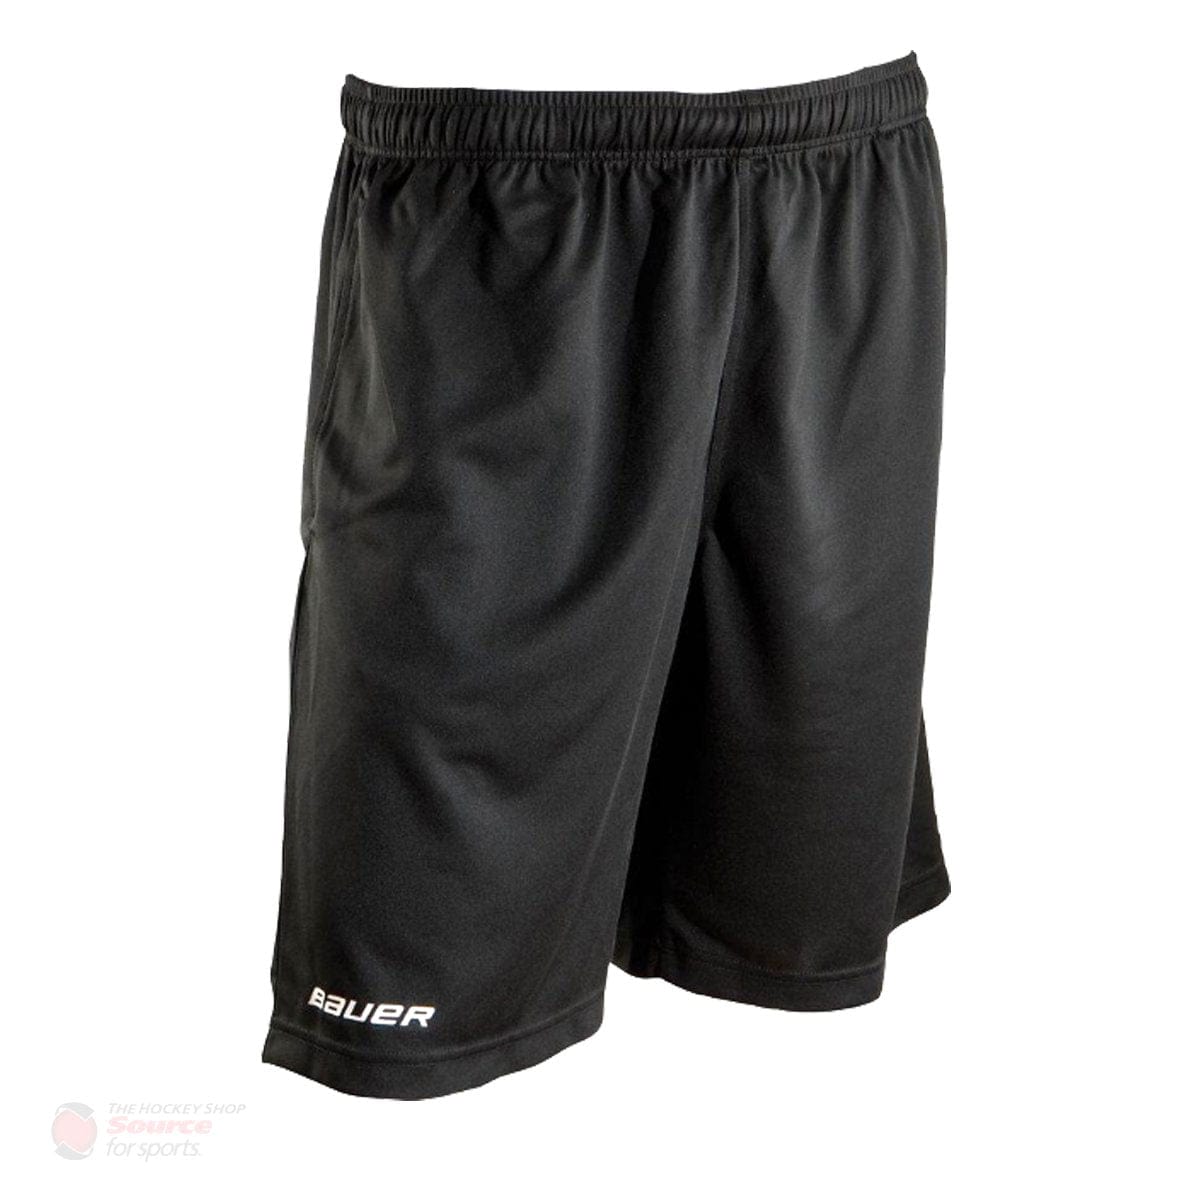 Bauer Team Youth Shorts (2014)